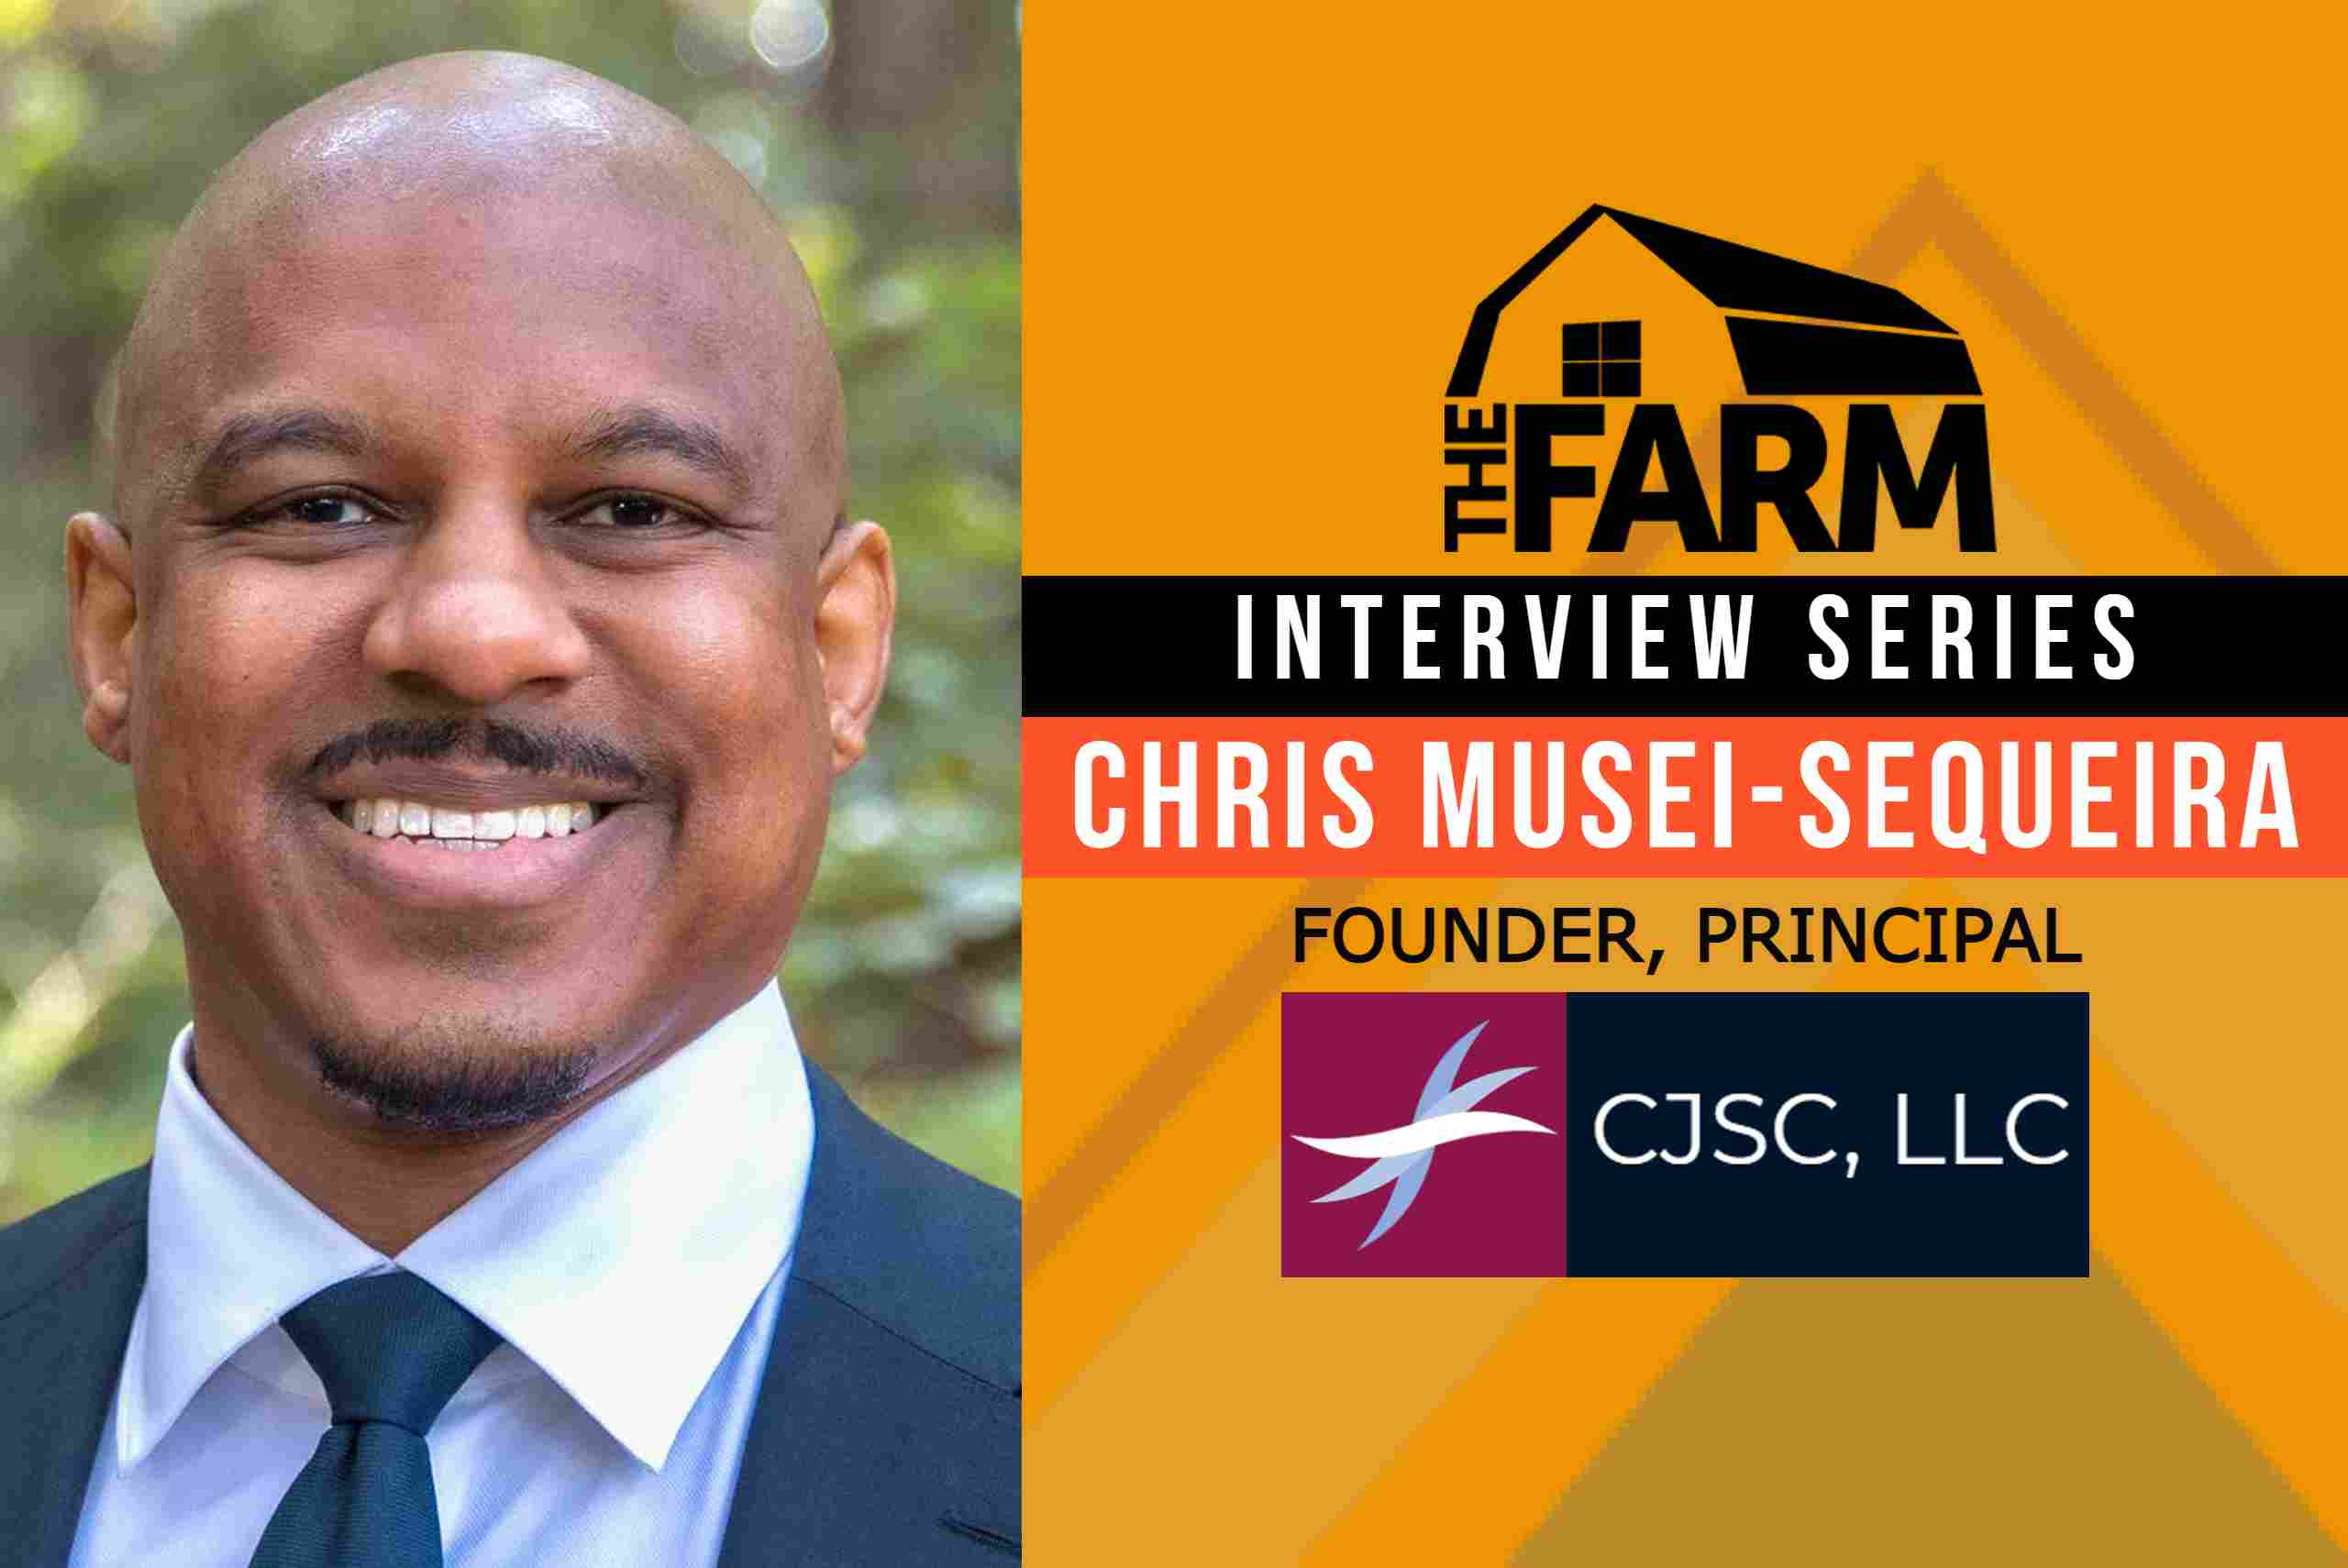 The Farm SoHo Coworking Member Q&A: Chris Musei-Sequeira (Founder and Principal of consulting firm CJSC, LLC)